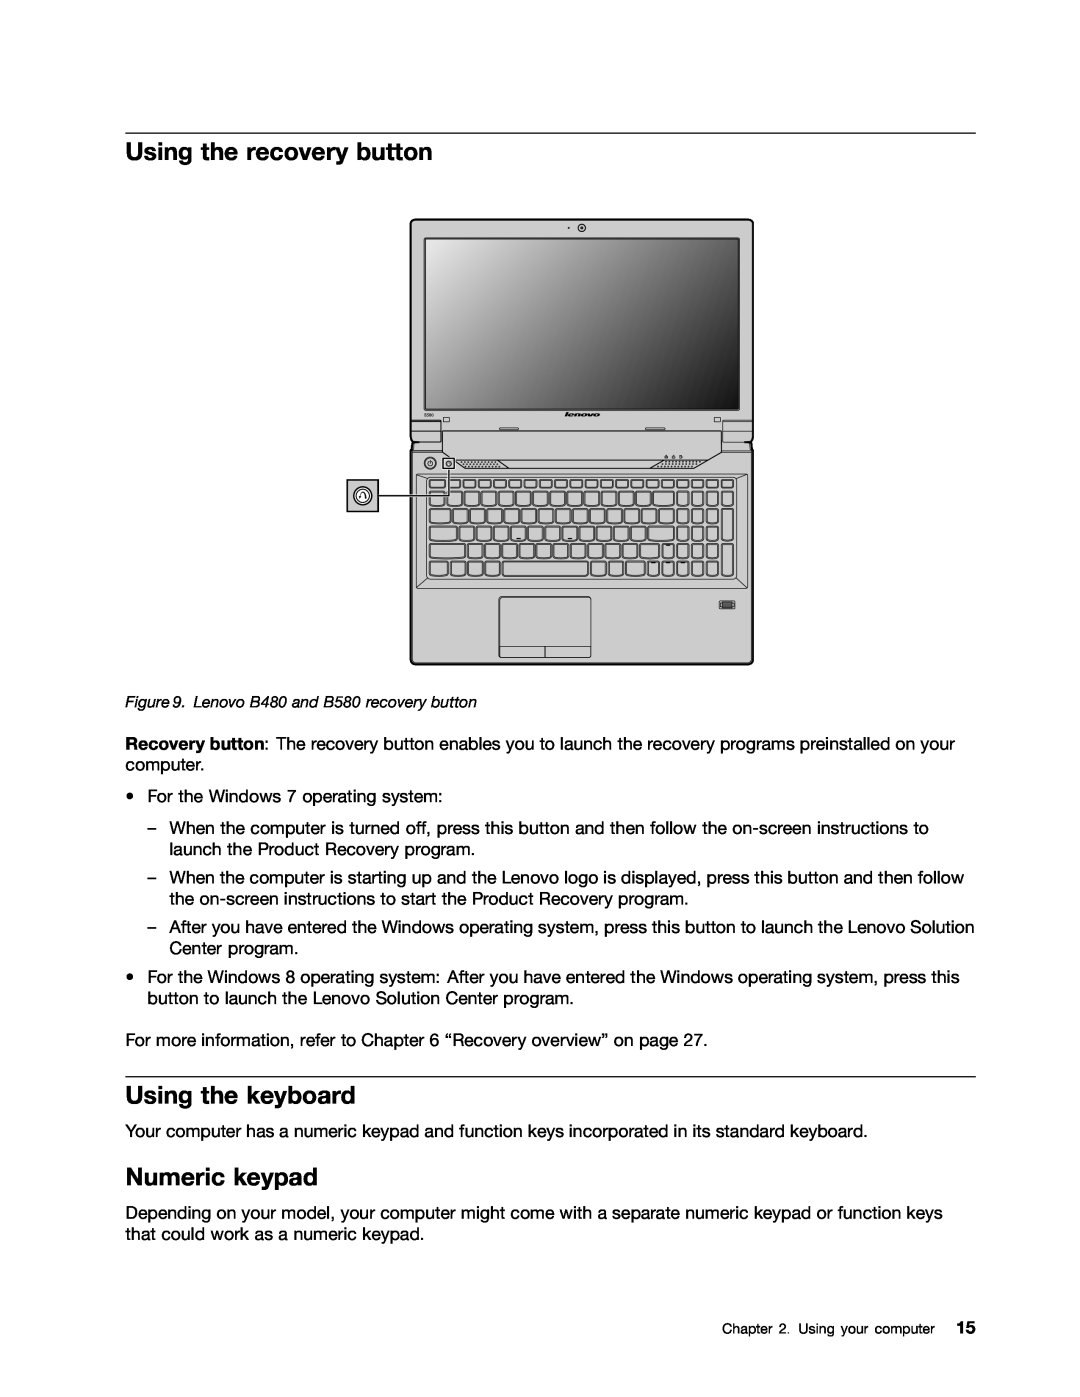 Lenovo manual Using the recovery button, Using the keyboard, Numeric keypad, Lenovo B480 and B580 recovery button 